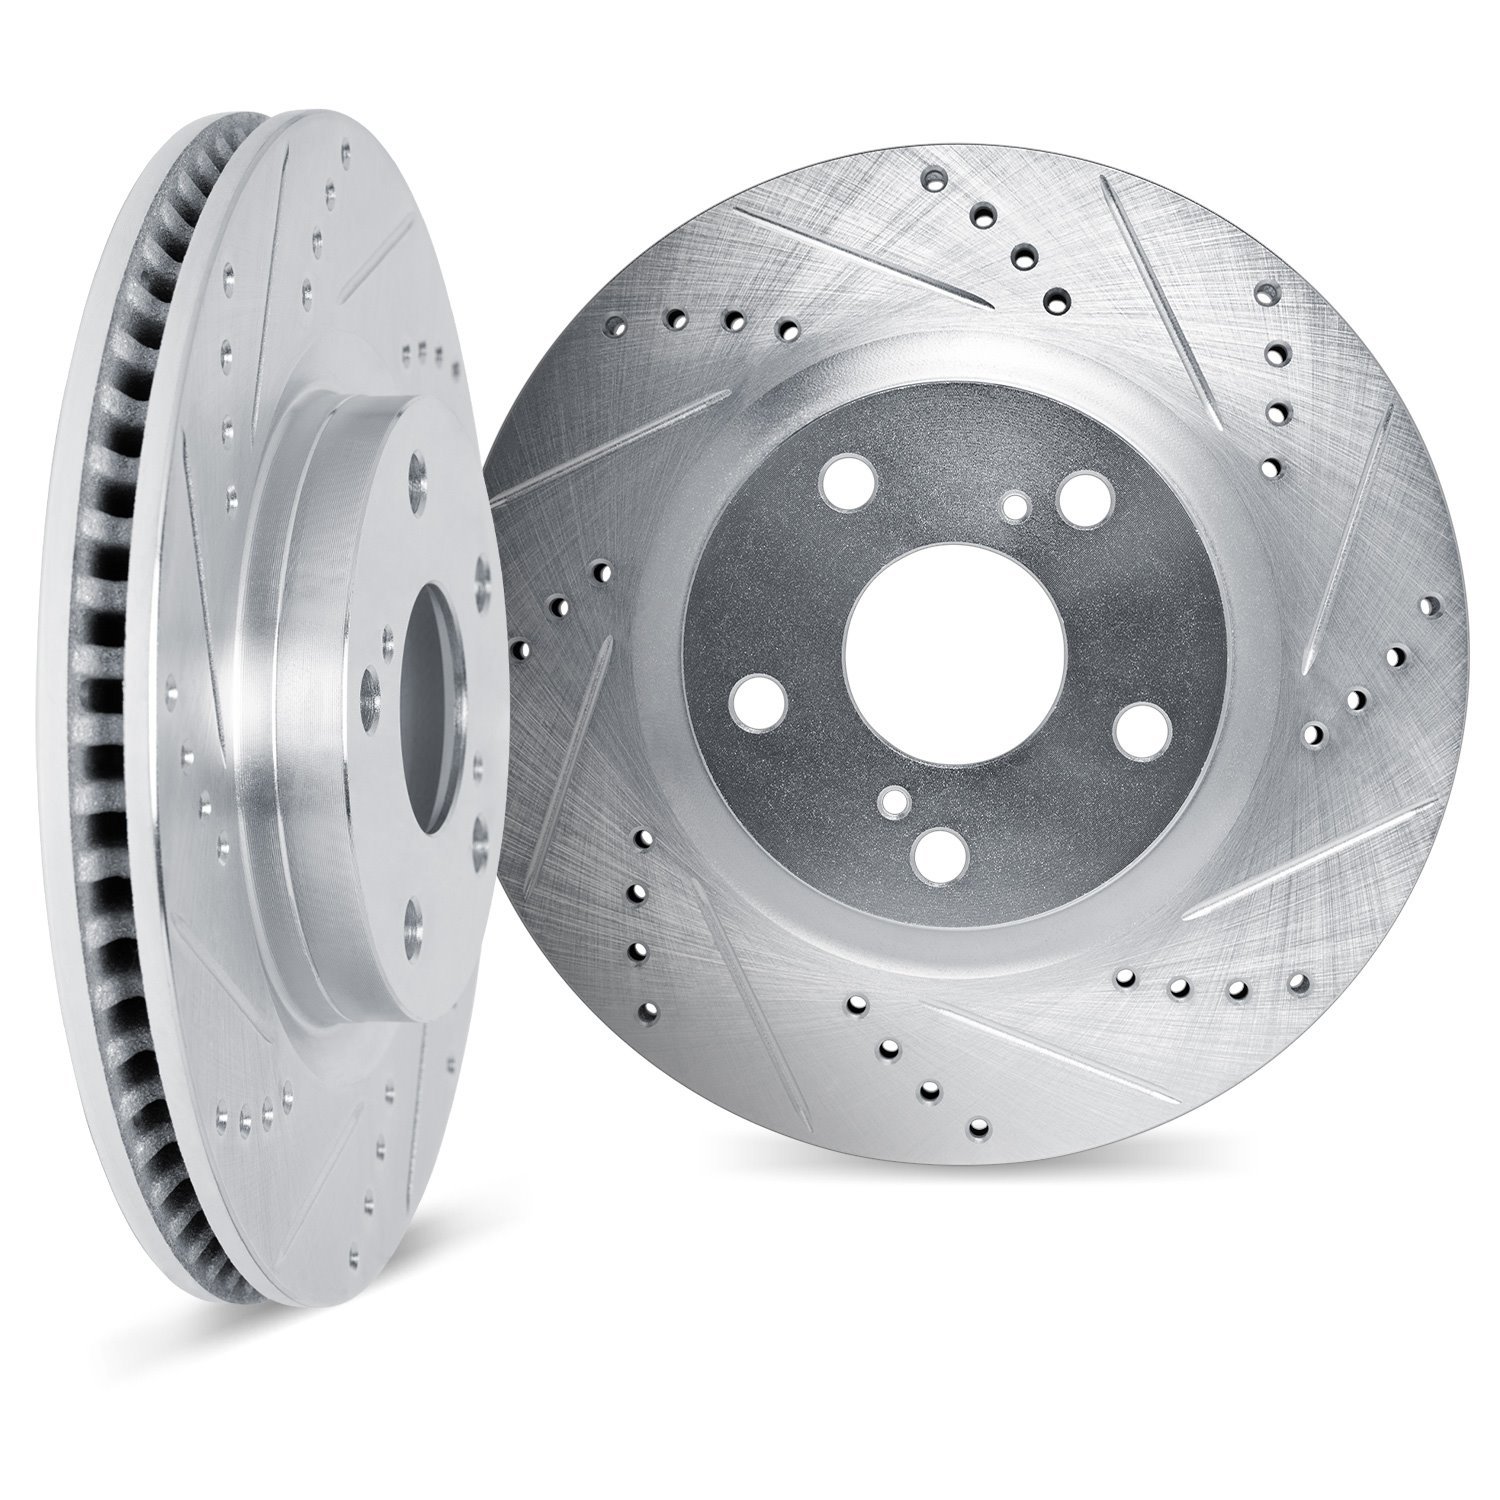 7002-73028 Drilled/Slotted Brake Rotors [Silver], Fits Select Audi/Volkswagen, Position: Front